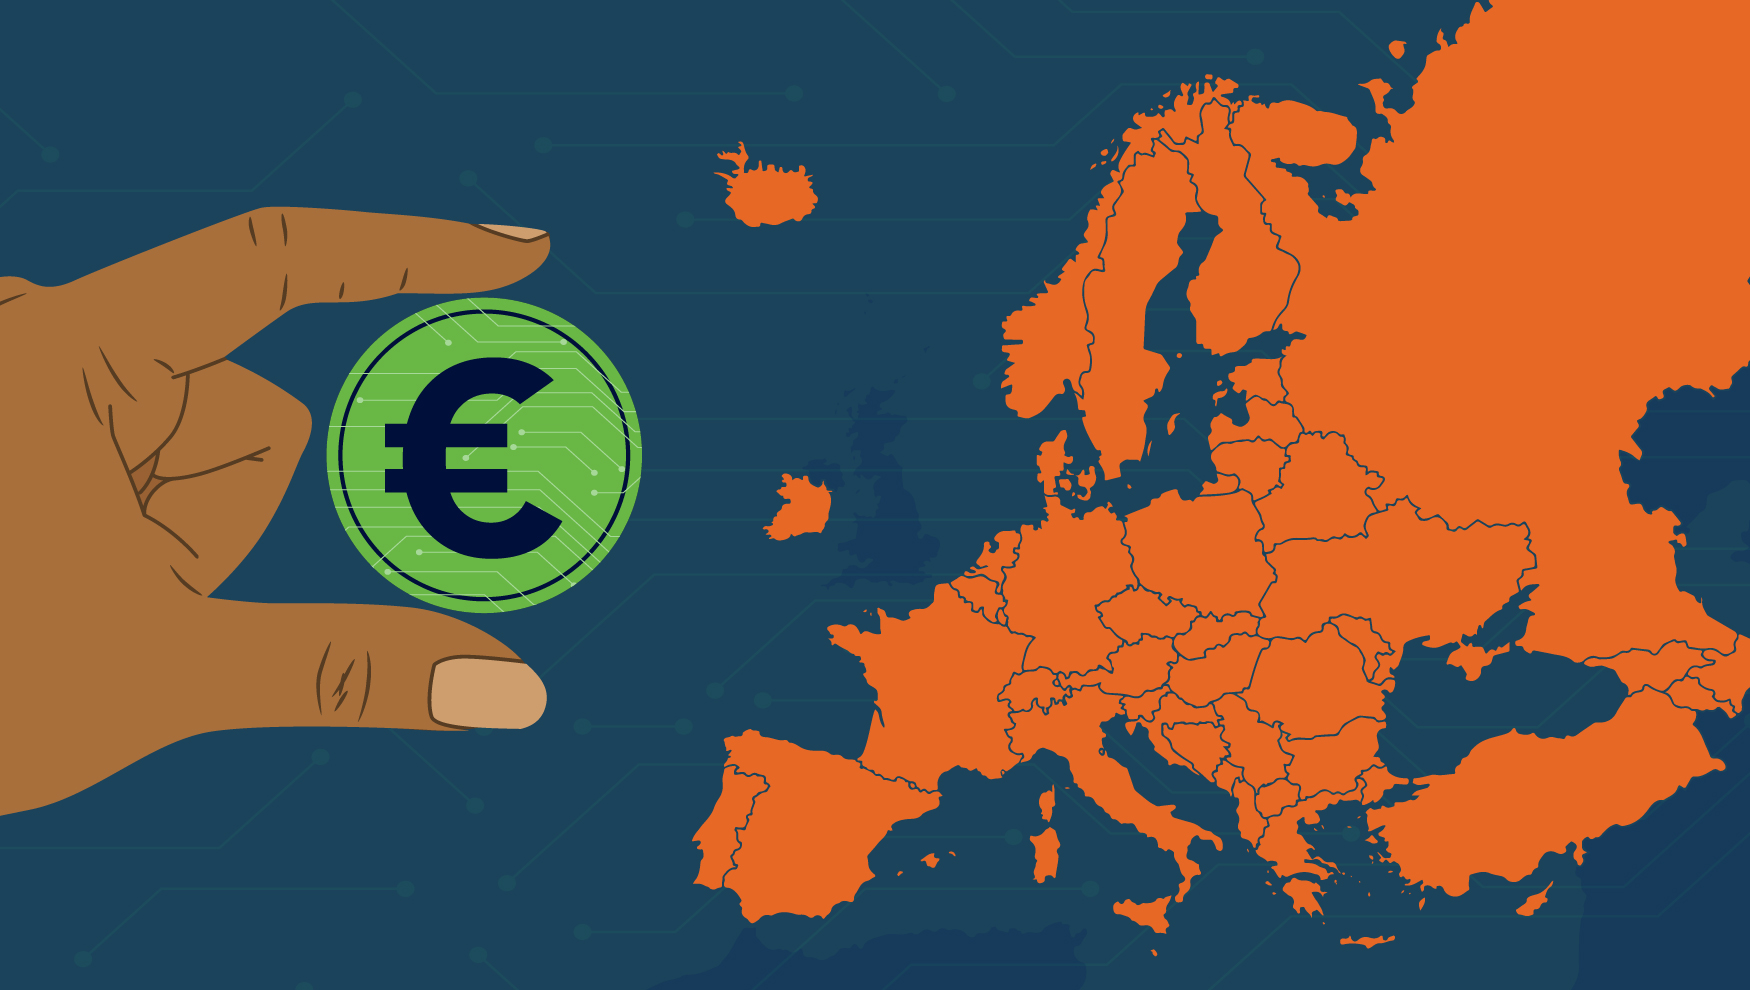 Illustration of digital euro against European continent outline, as part of story on EU payments legislation